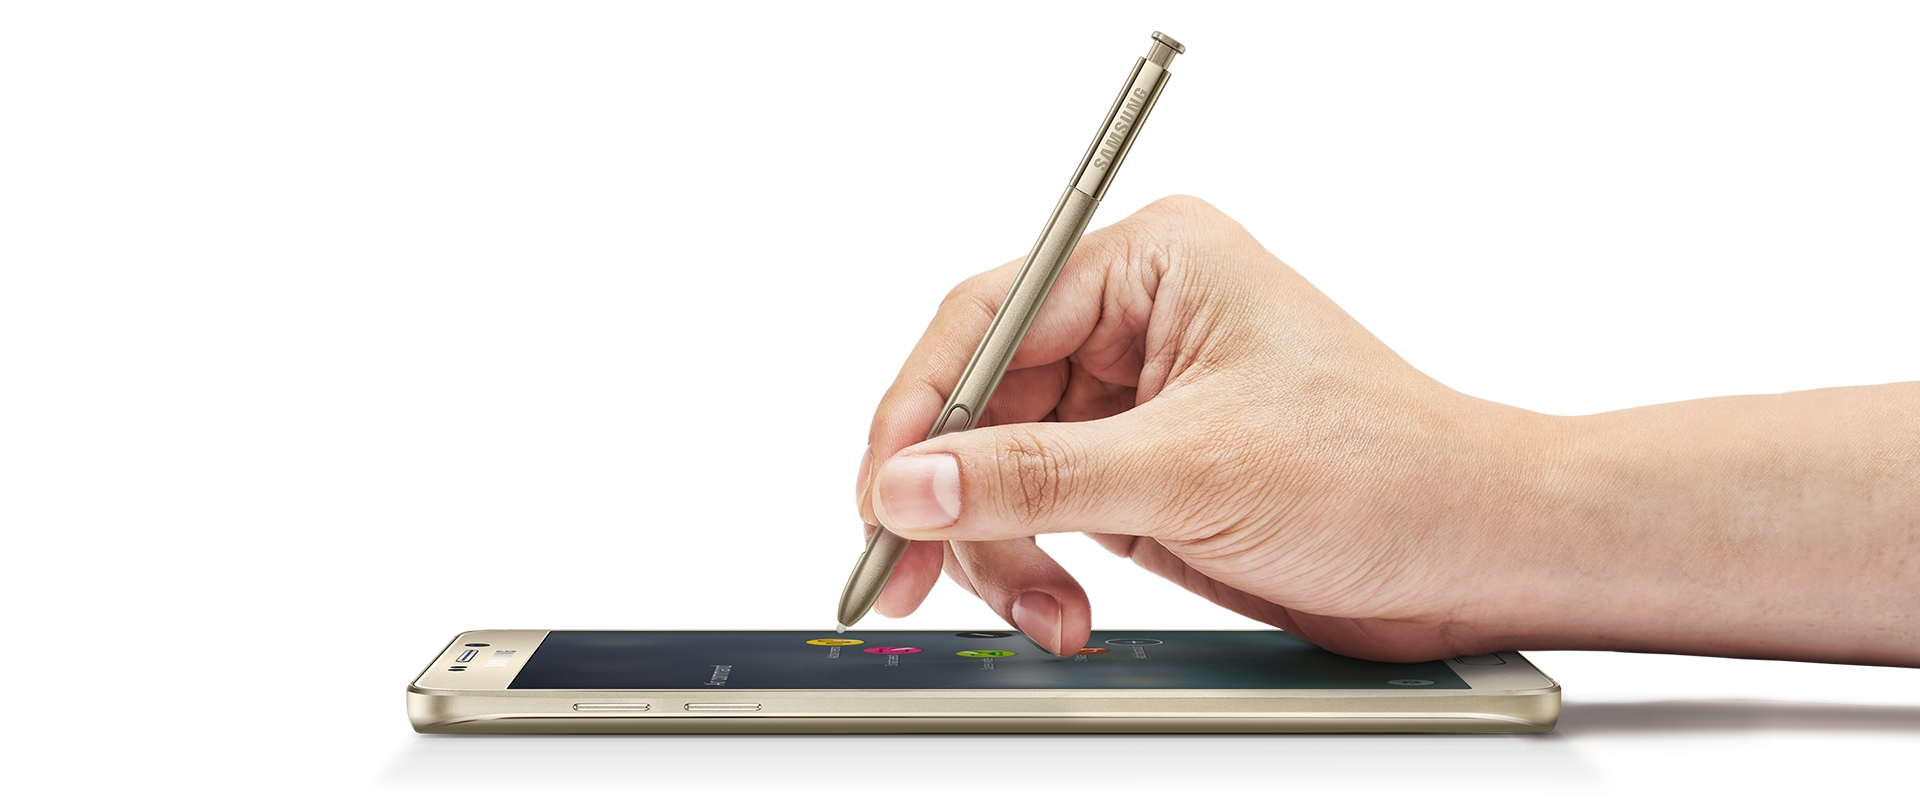 Gold platinum Galaxy Note5 and S Pen